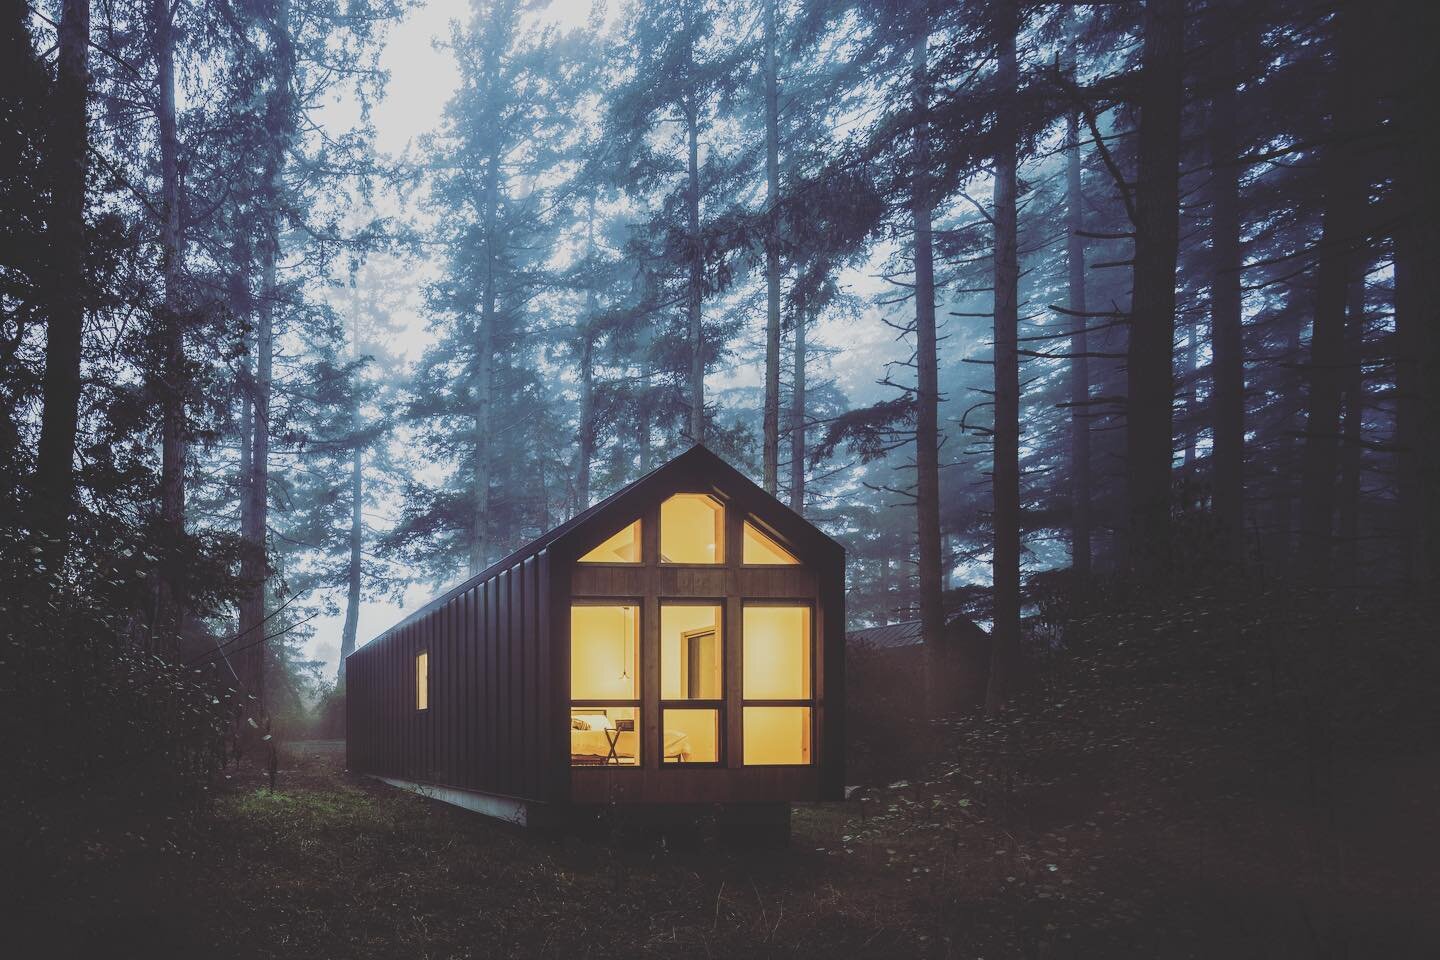 All tucked away. ~Will~you join us on an enchanted island retreat? We have 2 spaces in this eco cabin set in the mossy and wondrous PNW forest. Please DM or visit link in profile for details. #connectexpandevolve #findyourforce